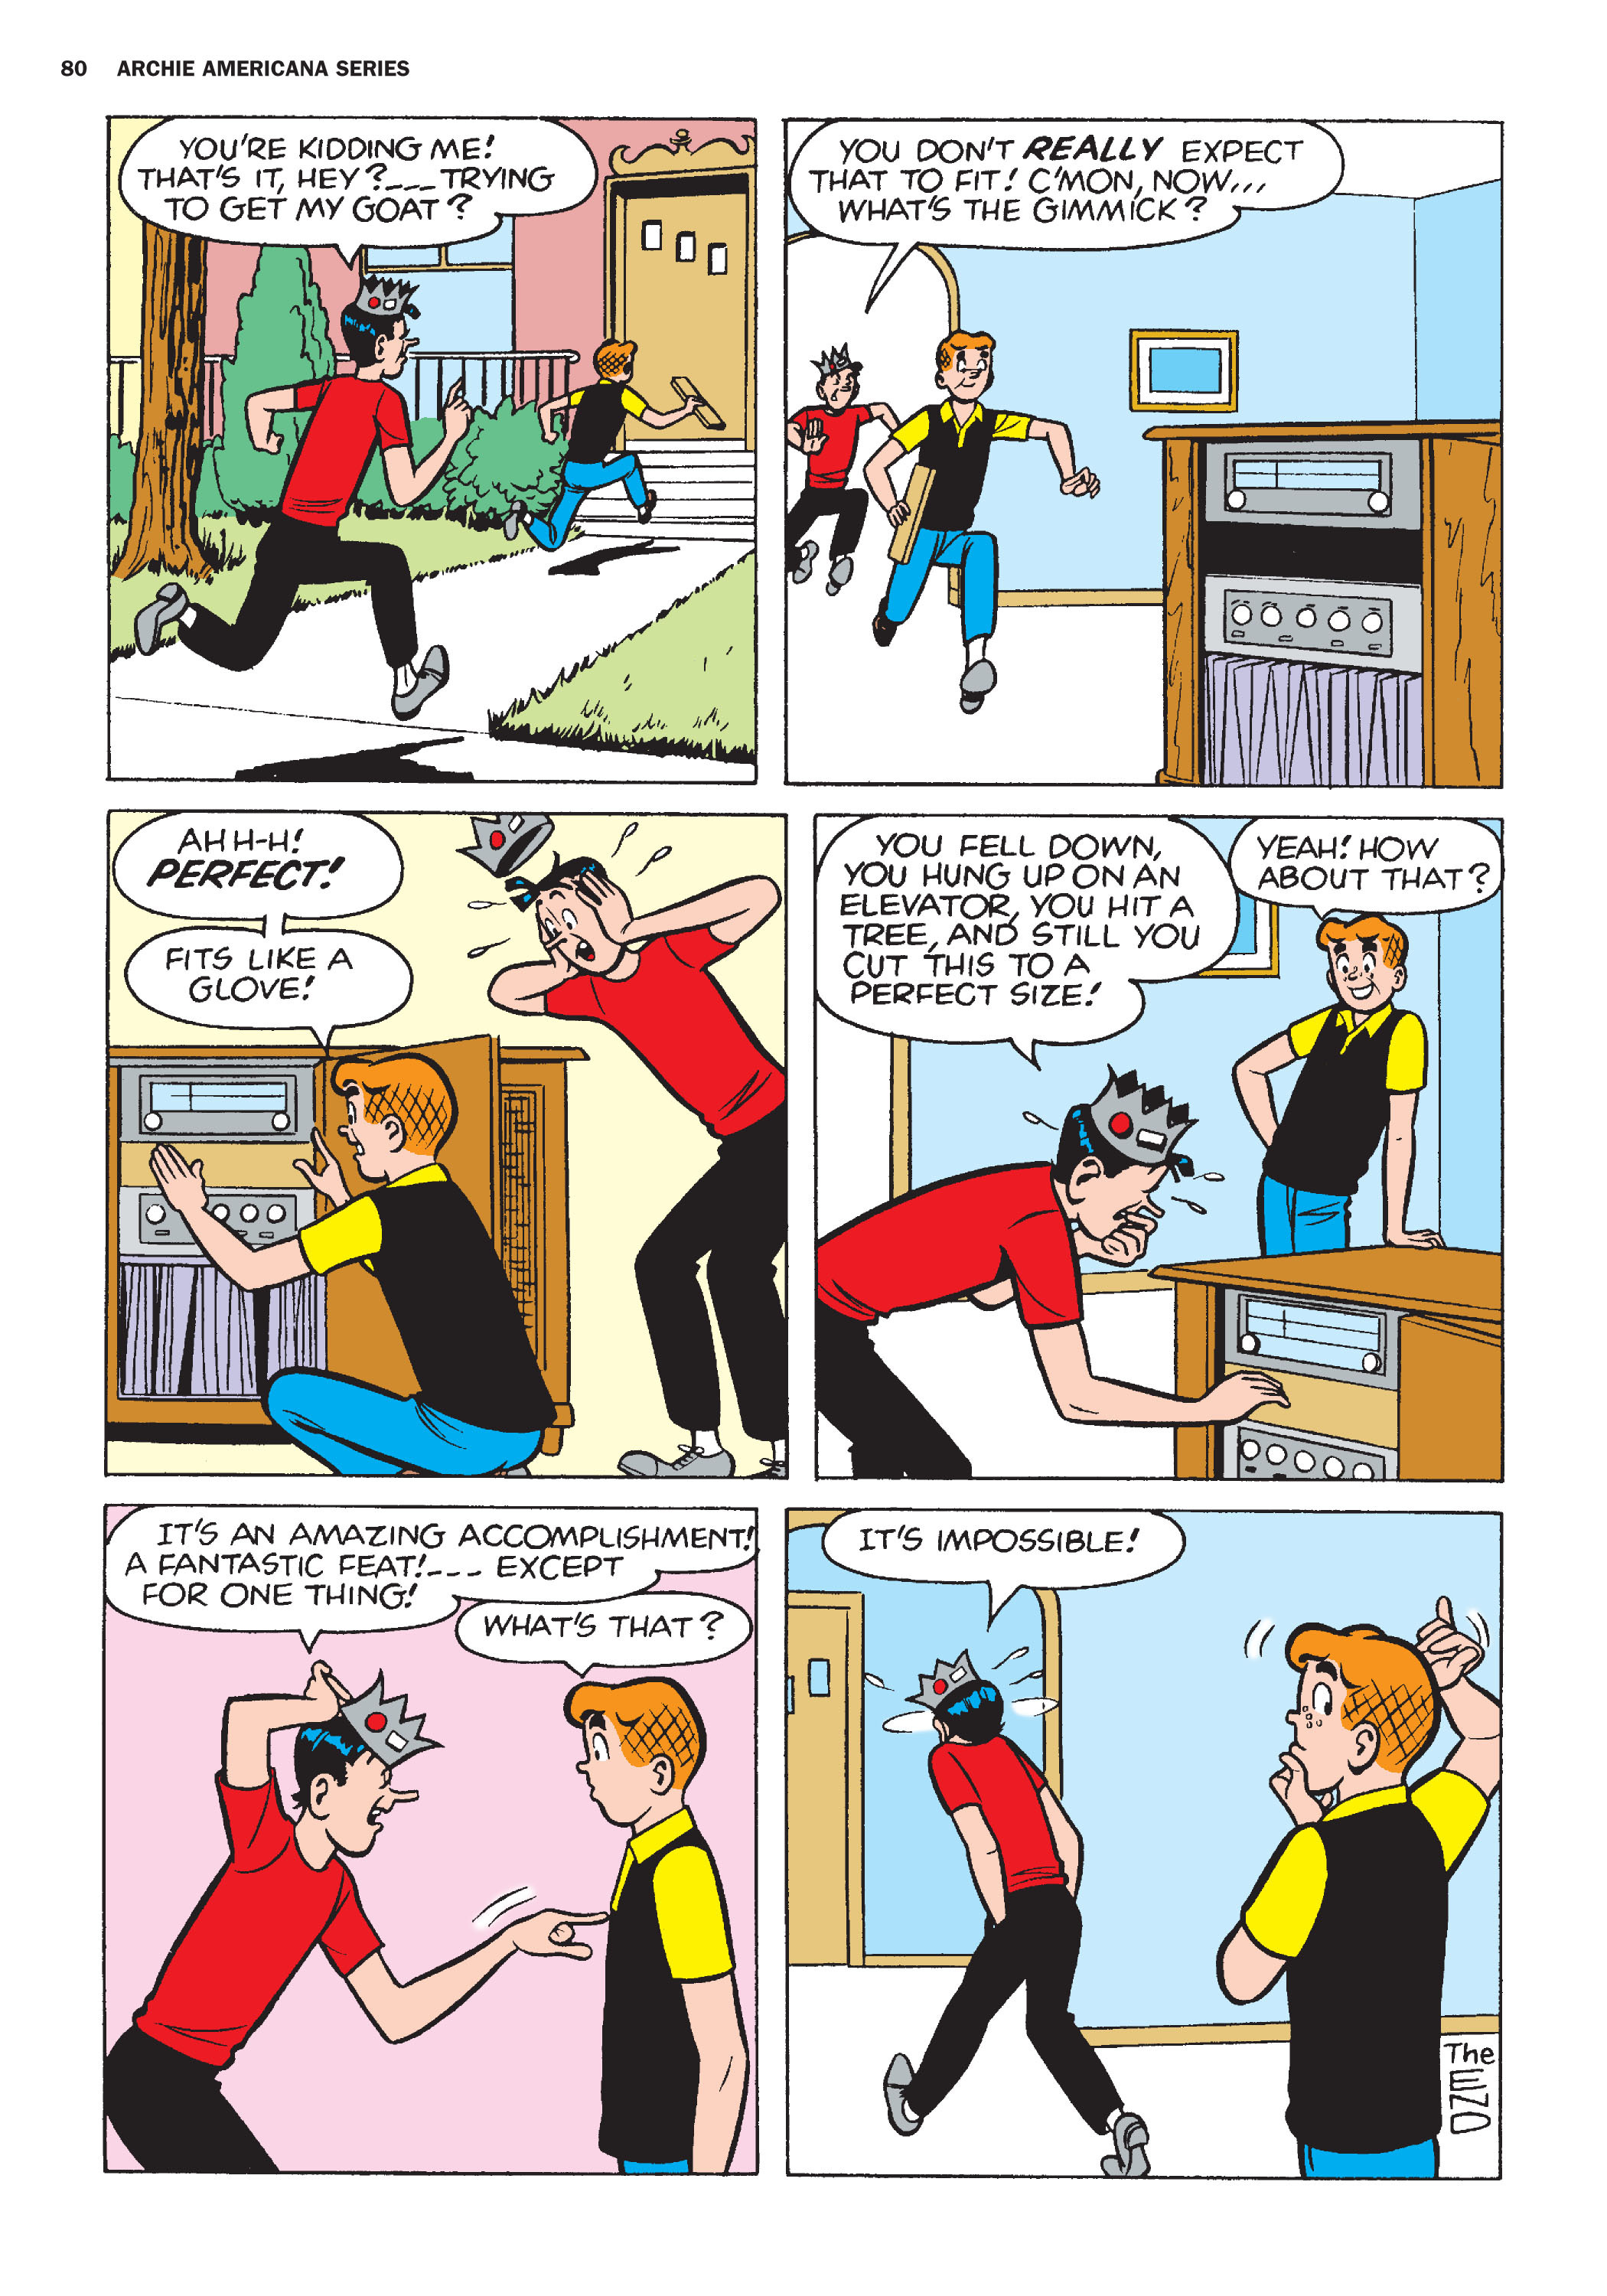 Read online Archie Americana Series comic -  Issue # TPB 8 - 81